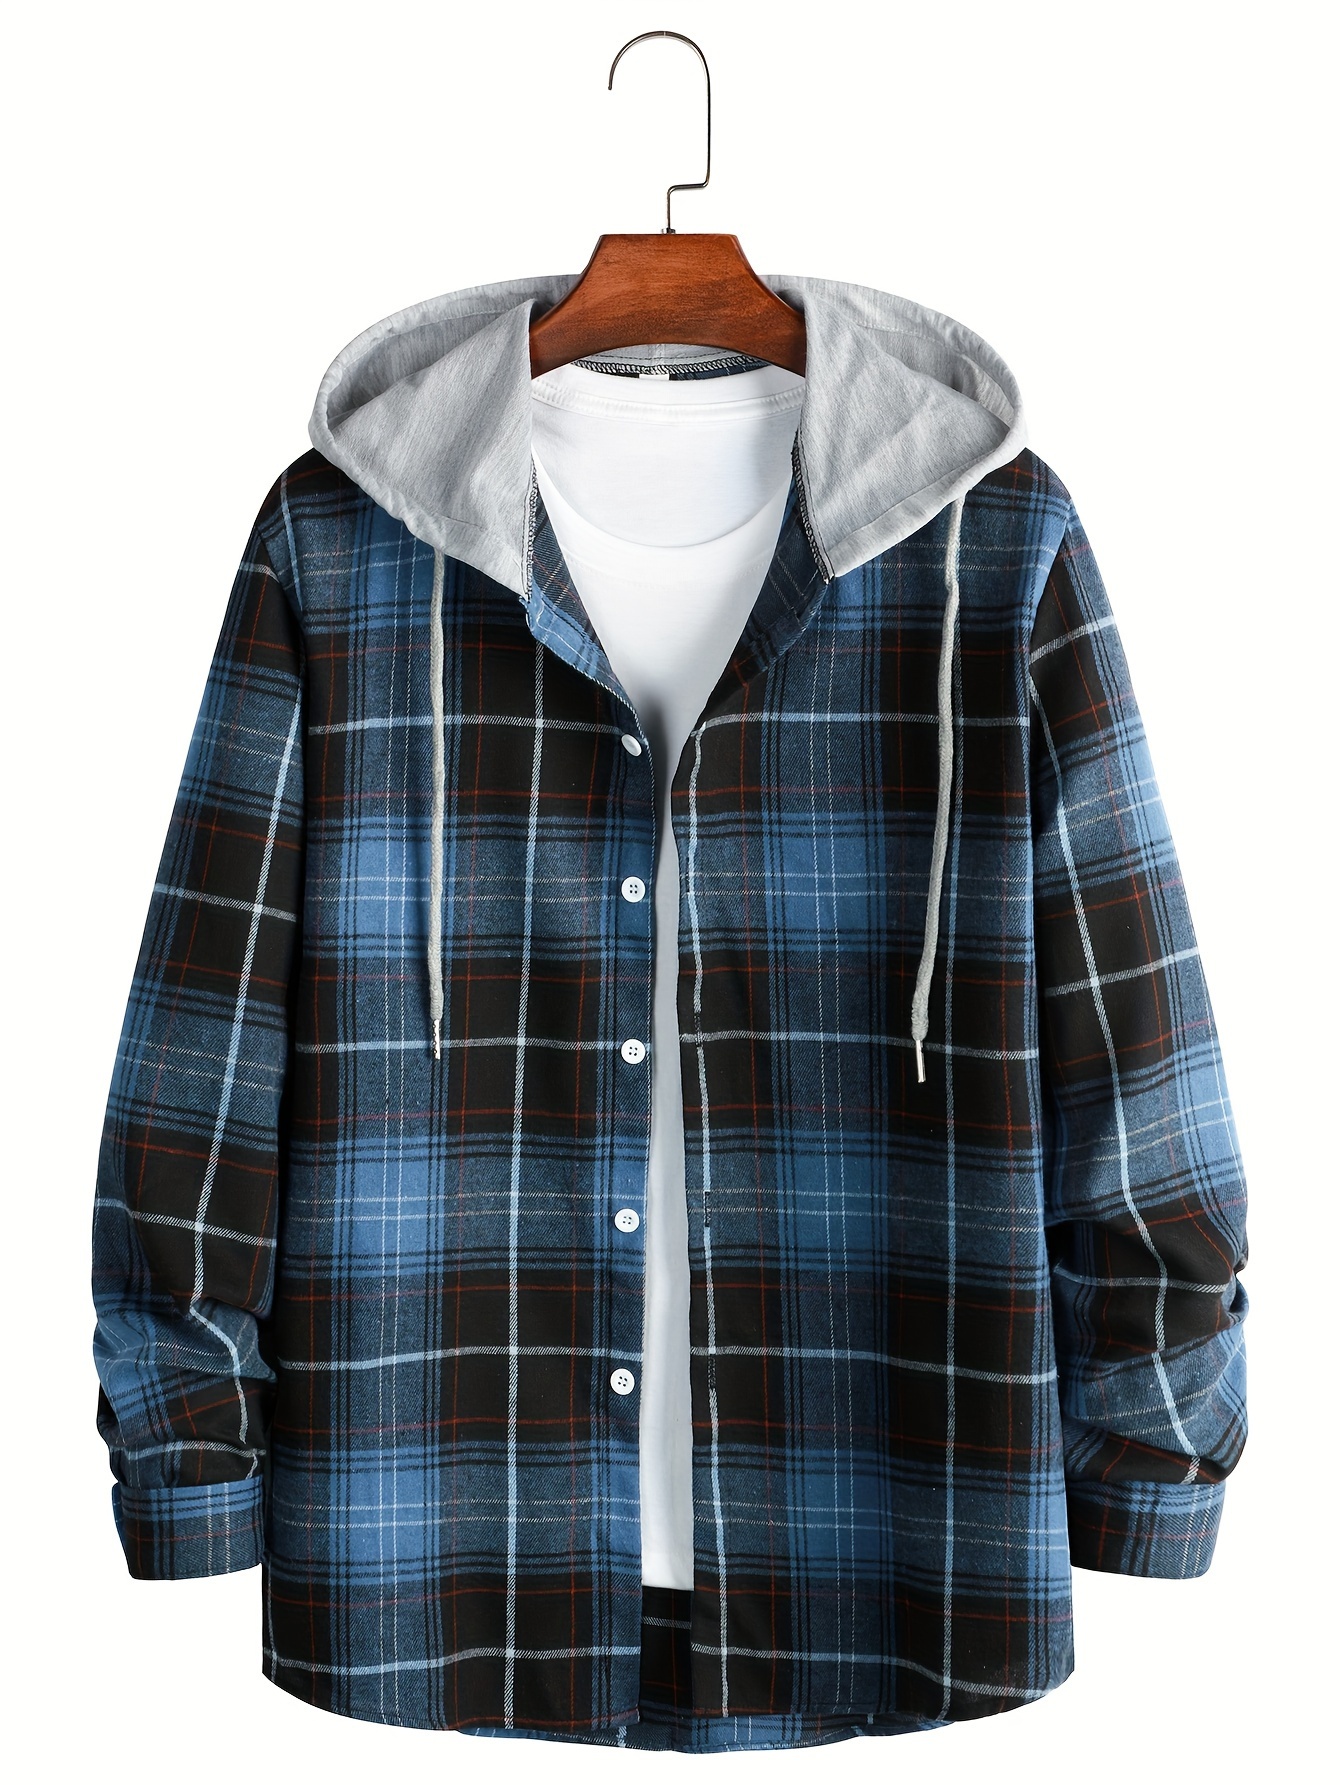 Big Plaid Pattern Men's All-match Long Sleeve Hooded Shirt With Drawstring  For Spring Fall Outdoor